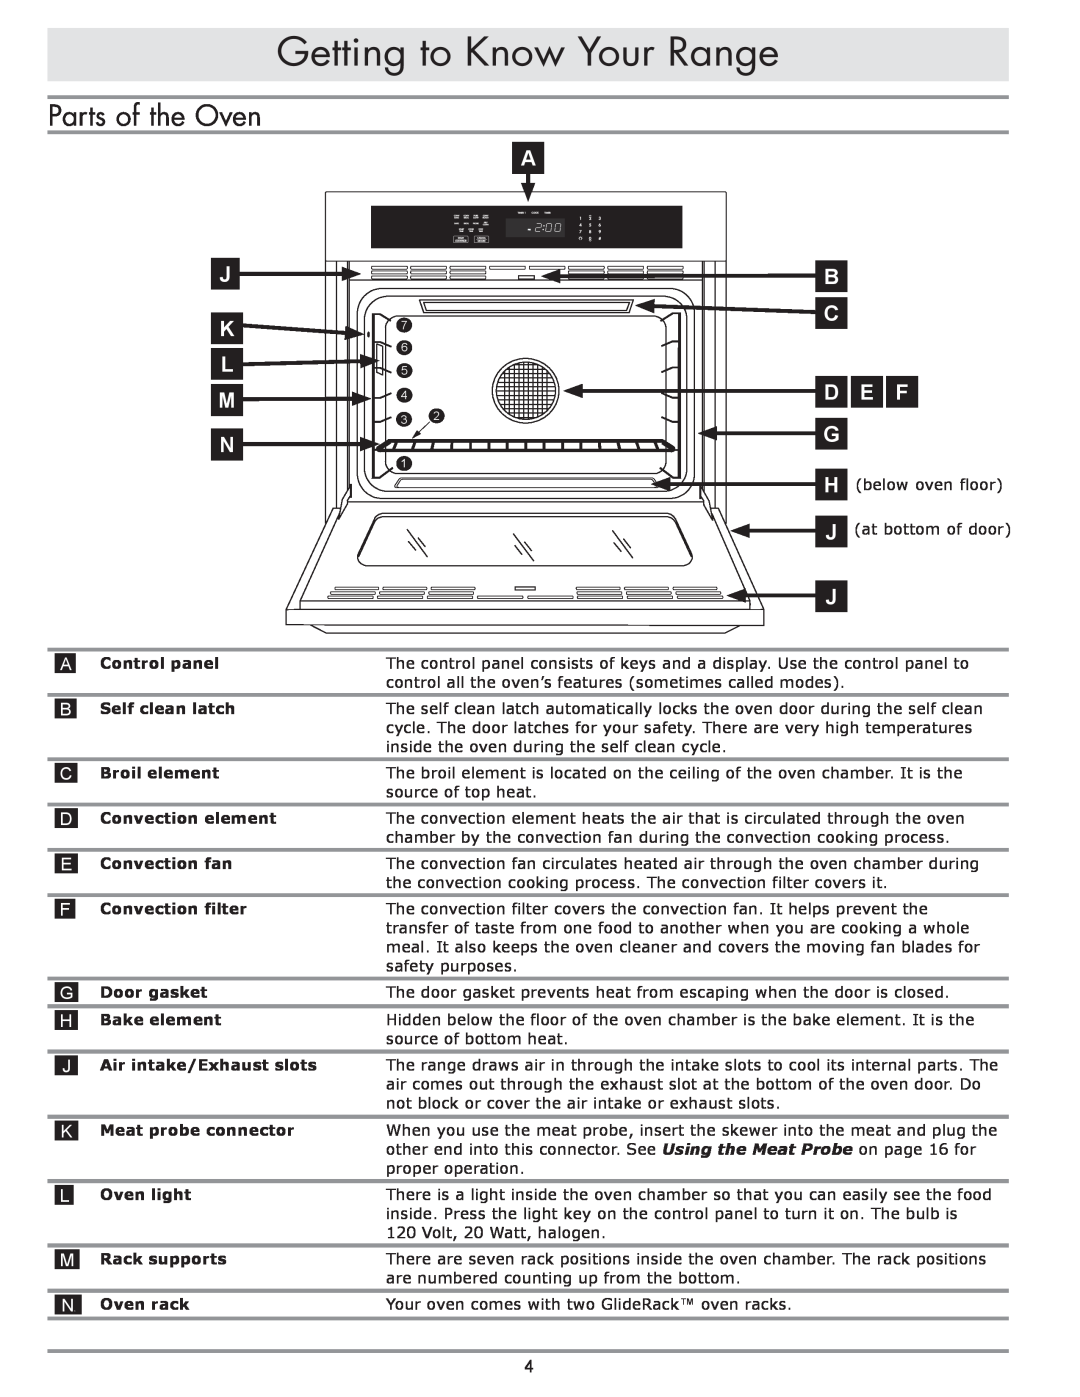 Dacor dacor important safety instructions Getting to Know Your Range, Parts of the Oven 